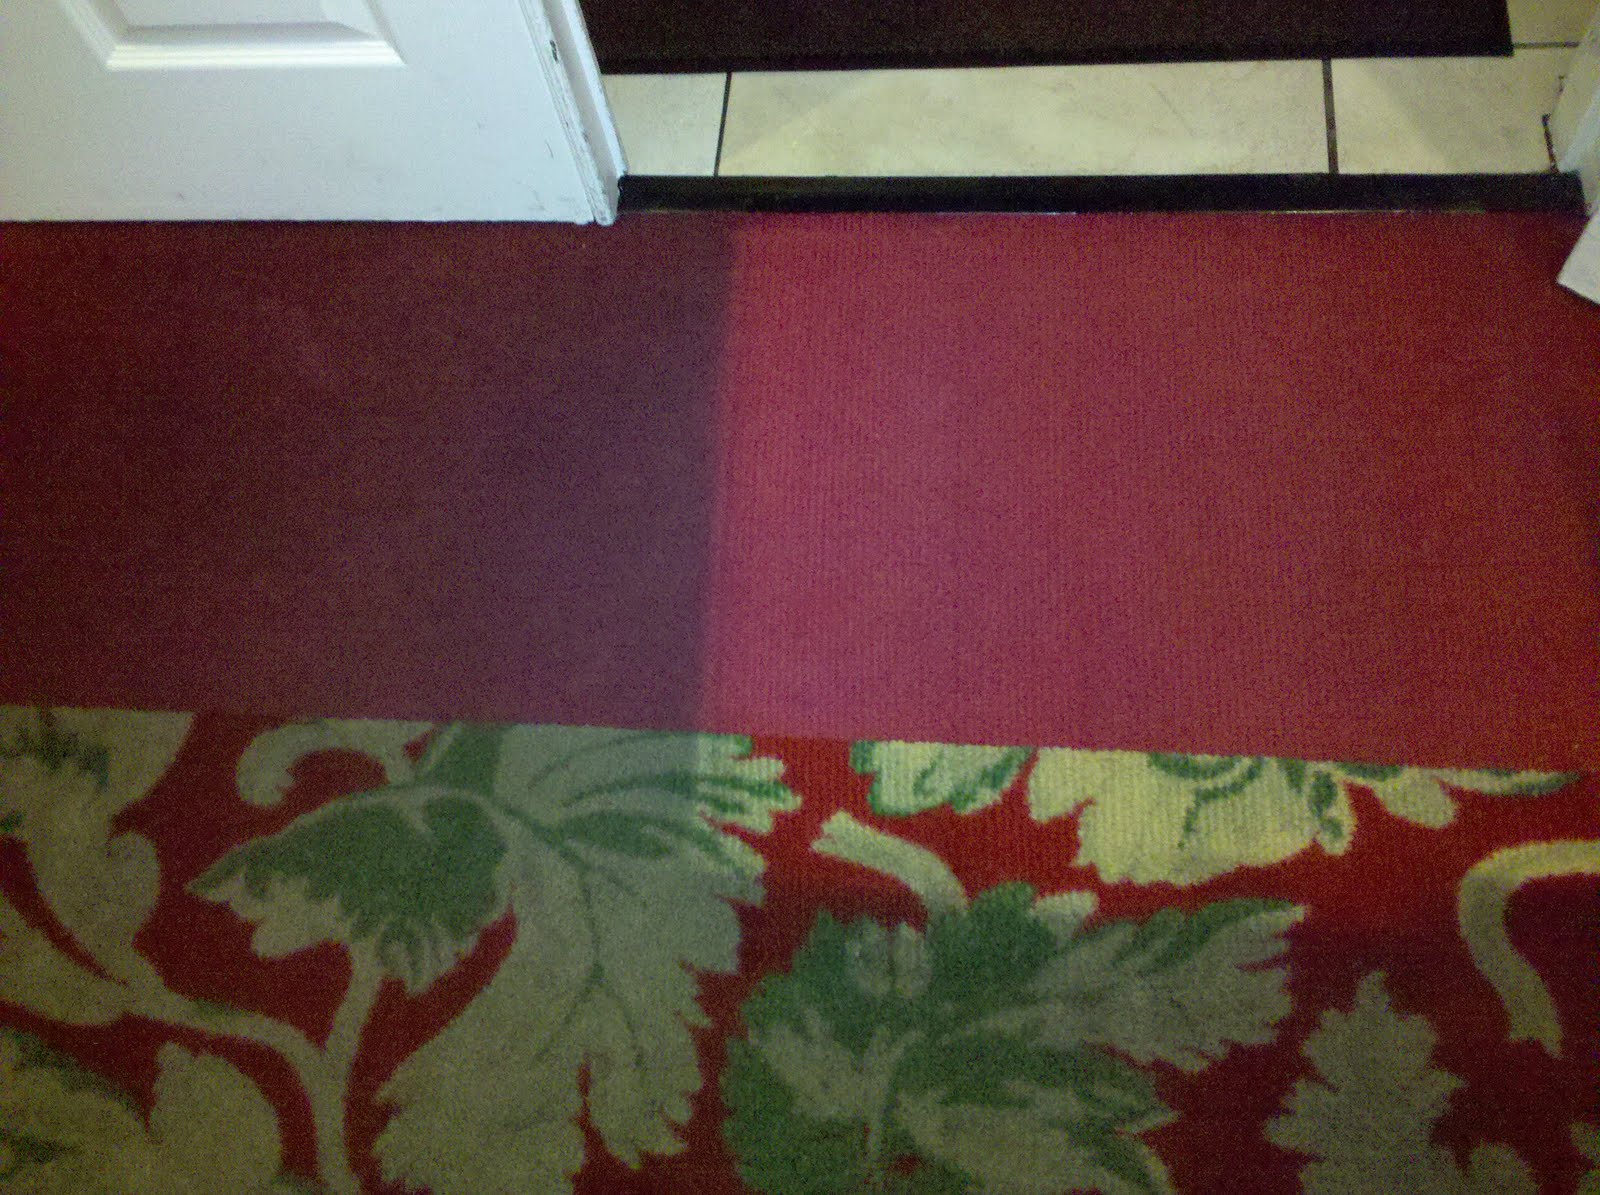 Pay-Less Carpet Cleaning: Restaurant carpet cleaning